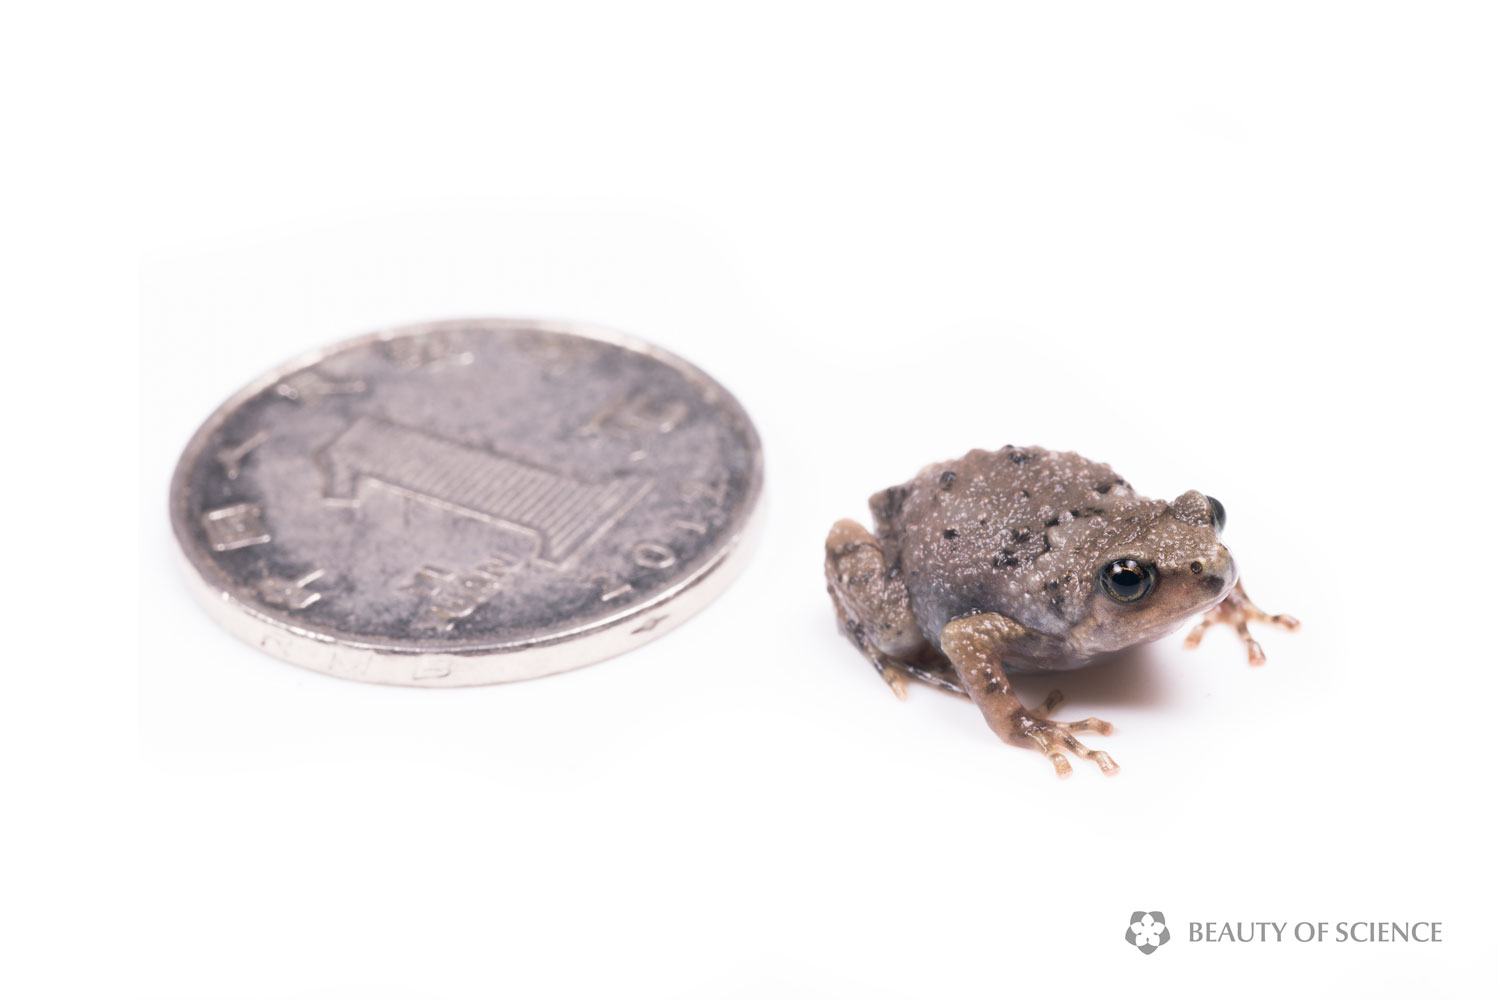  A young Sichuan narrow-mouthed frog is smaller than a coin with a diameter of 25 mm. 